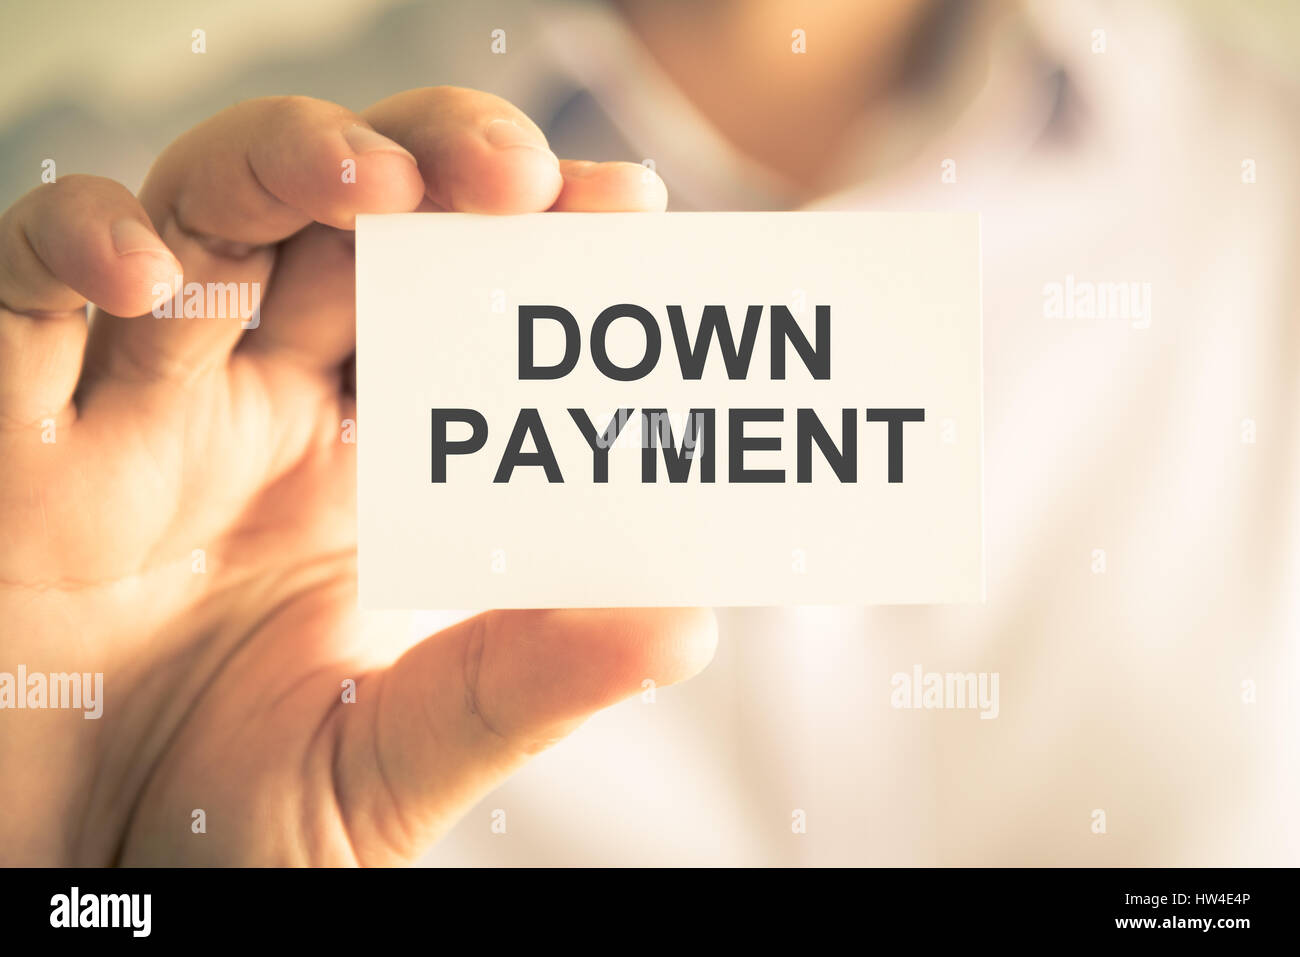 Closeup on businessman holding a card with text DOWN PAYMENT, business concept image with soft focus background and vintage tone Stock Photo